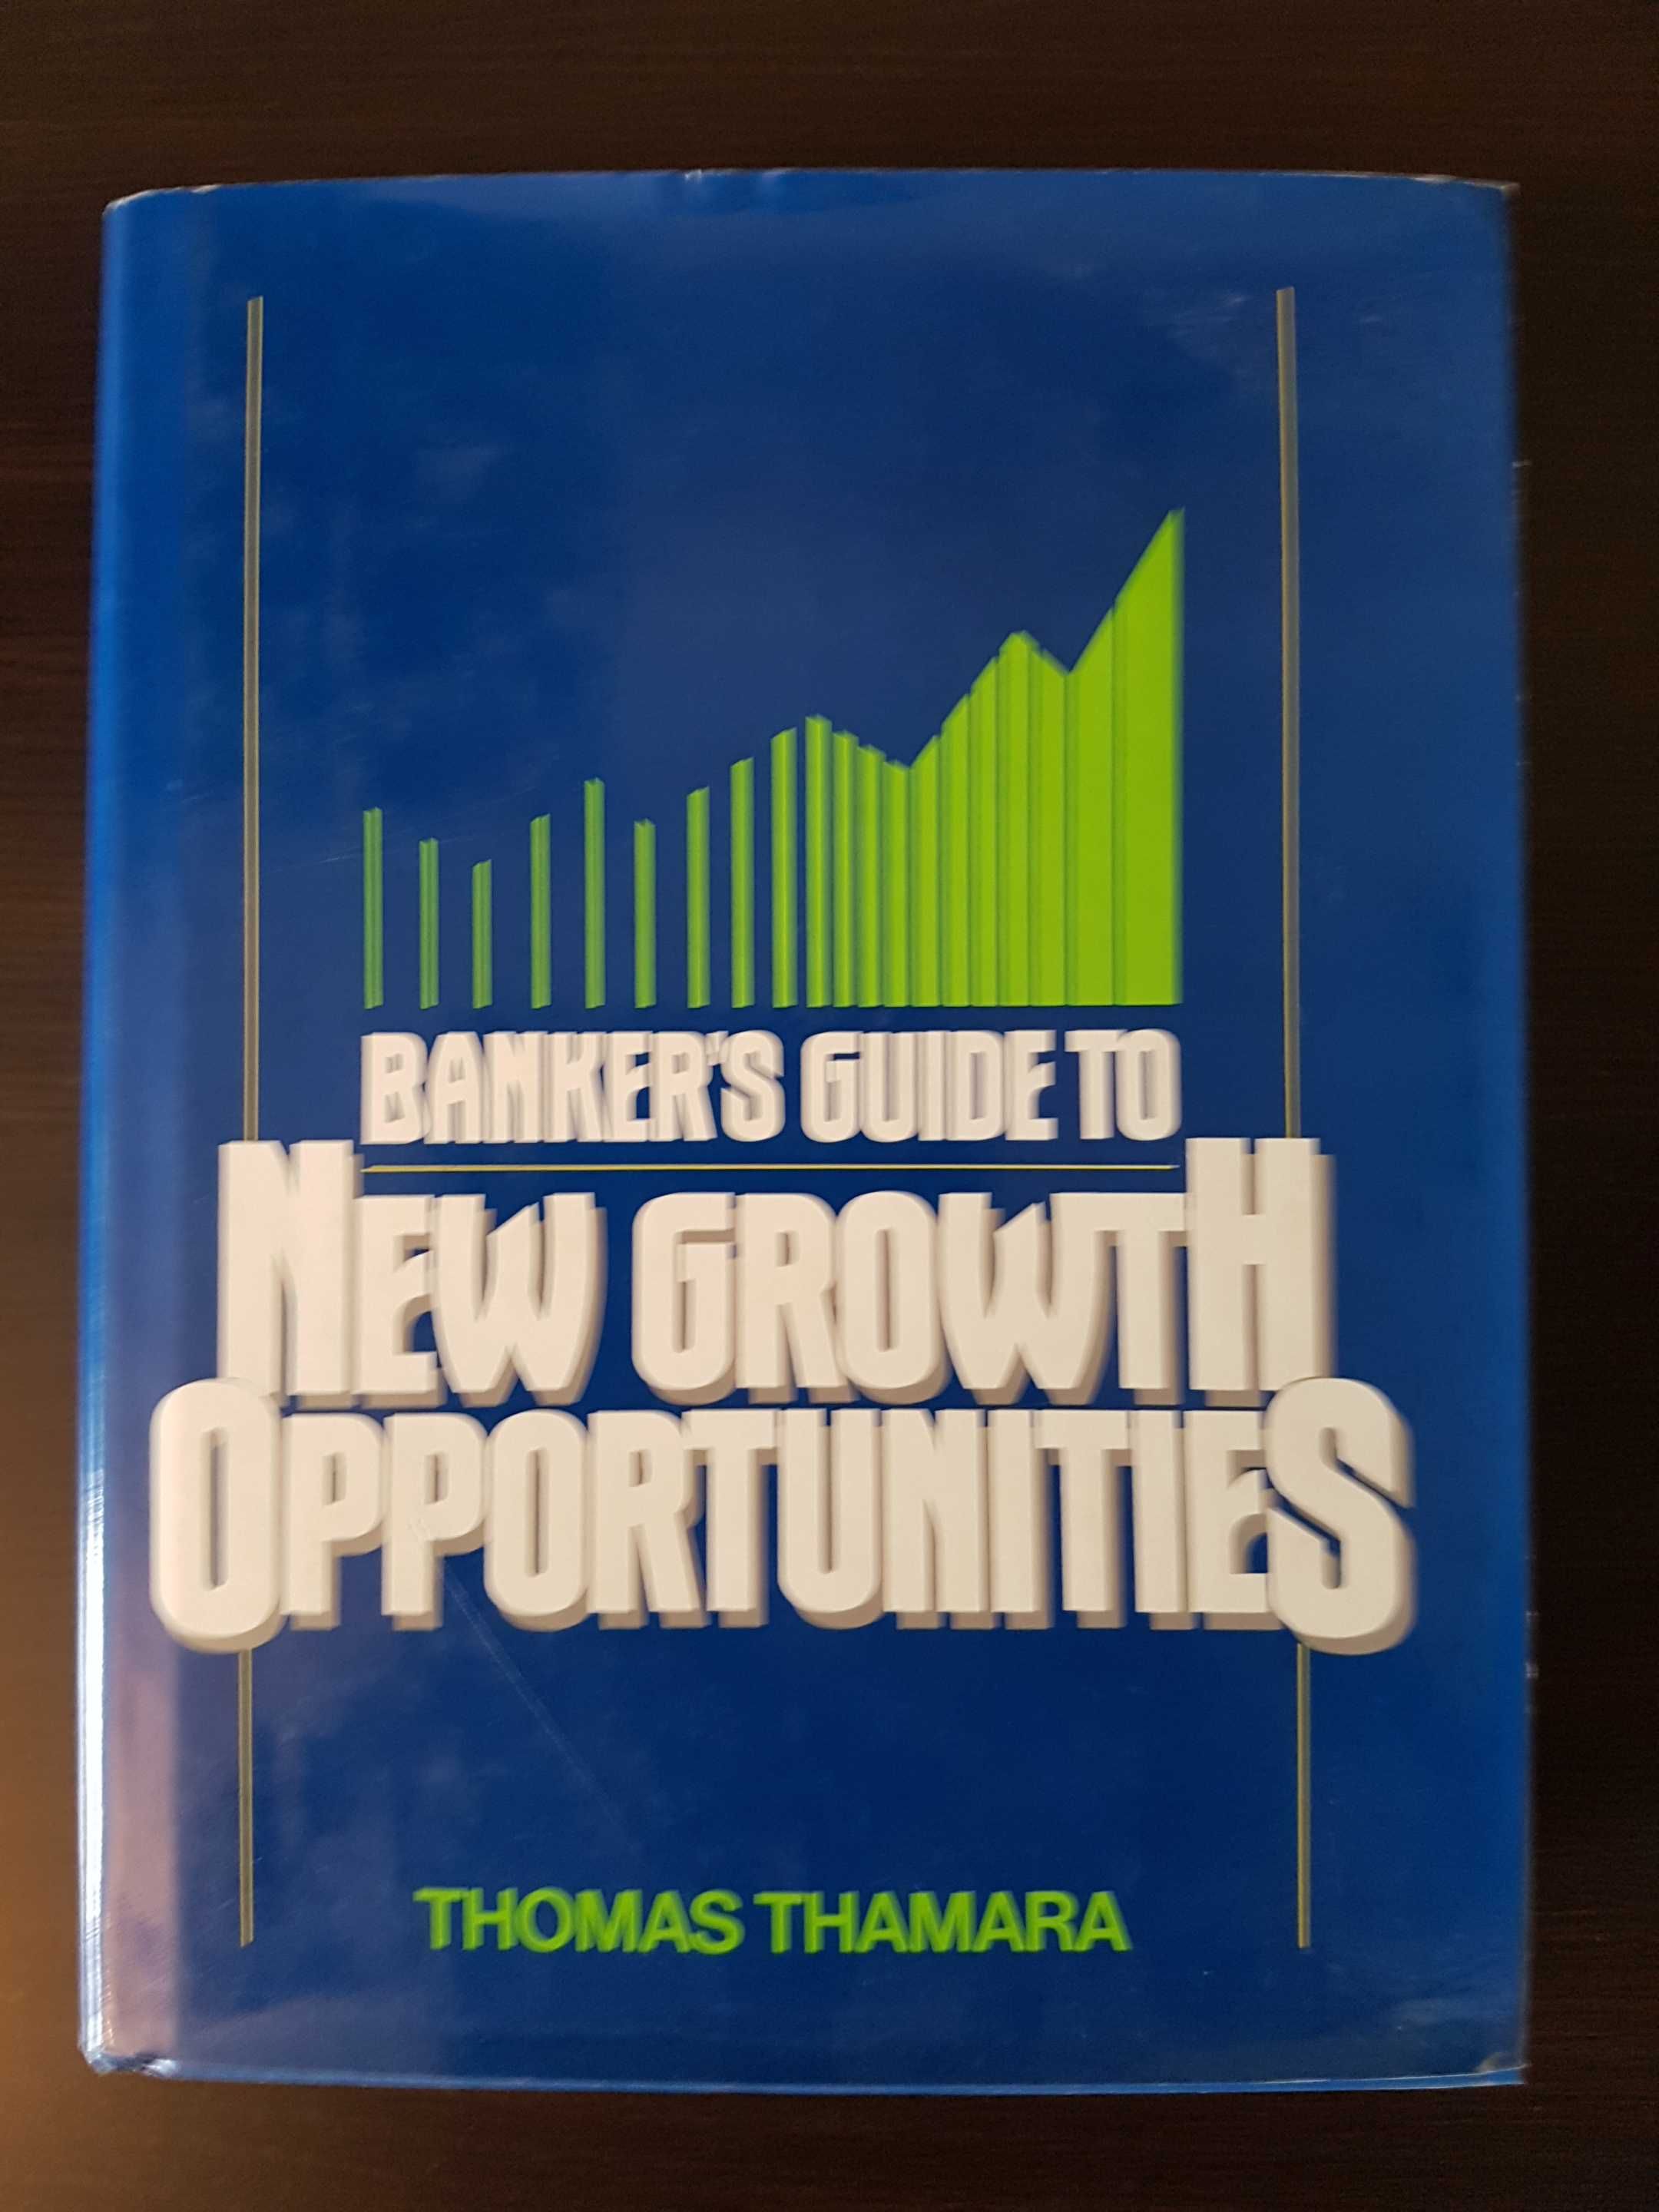 Banker's guide to new growth opportunities - Thomas Thamara